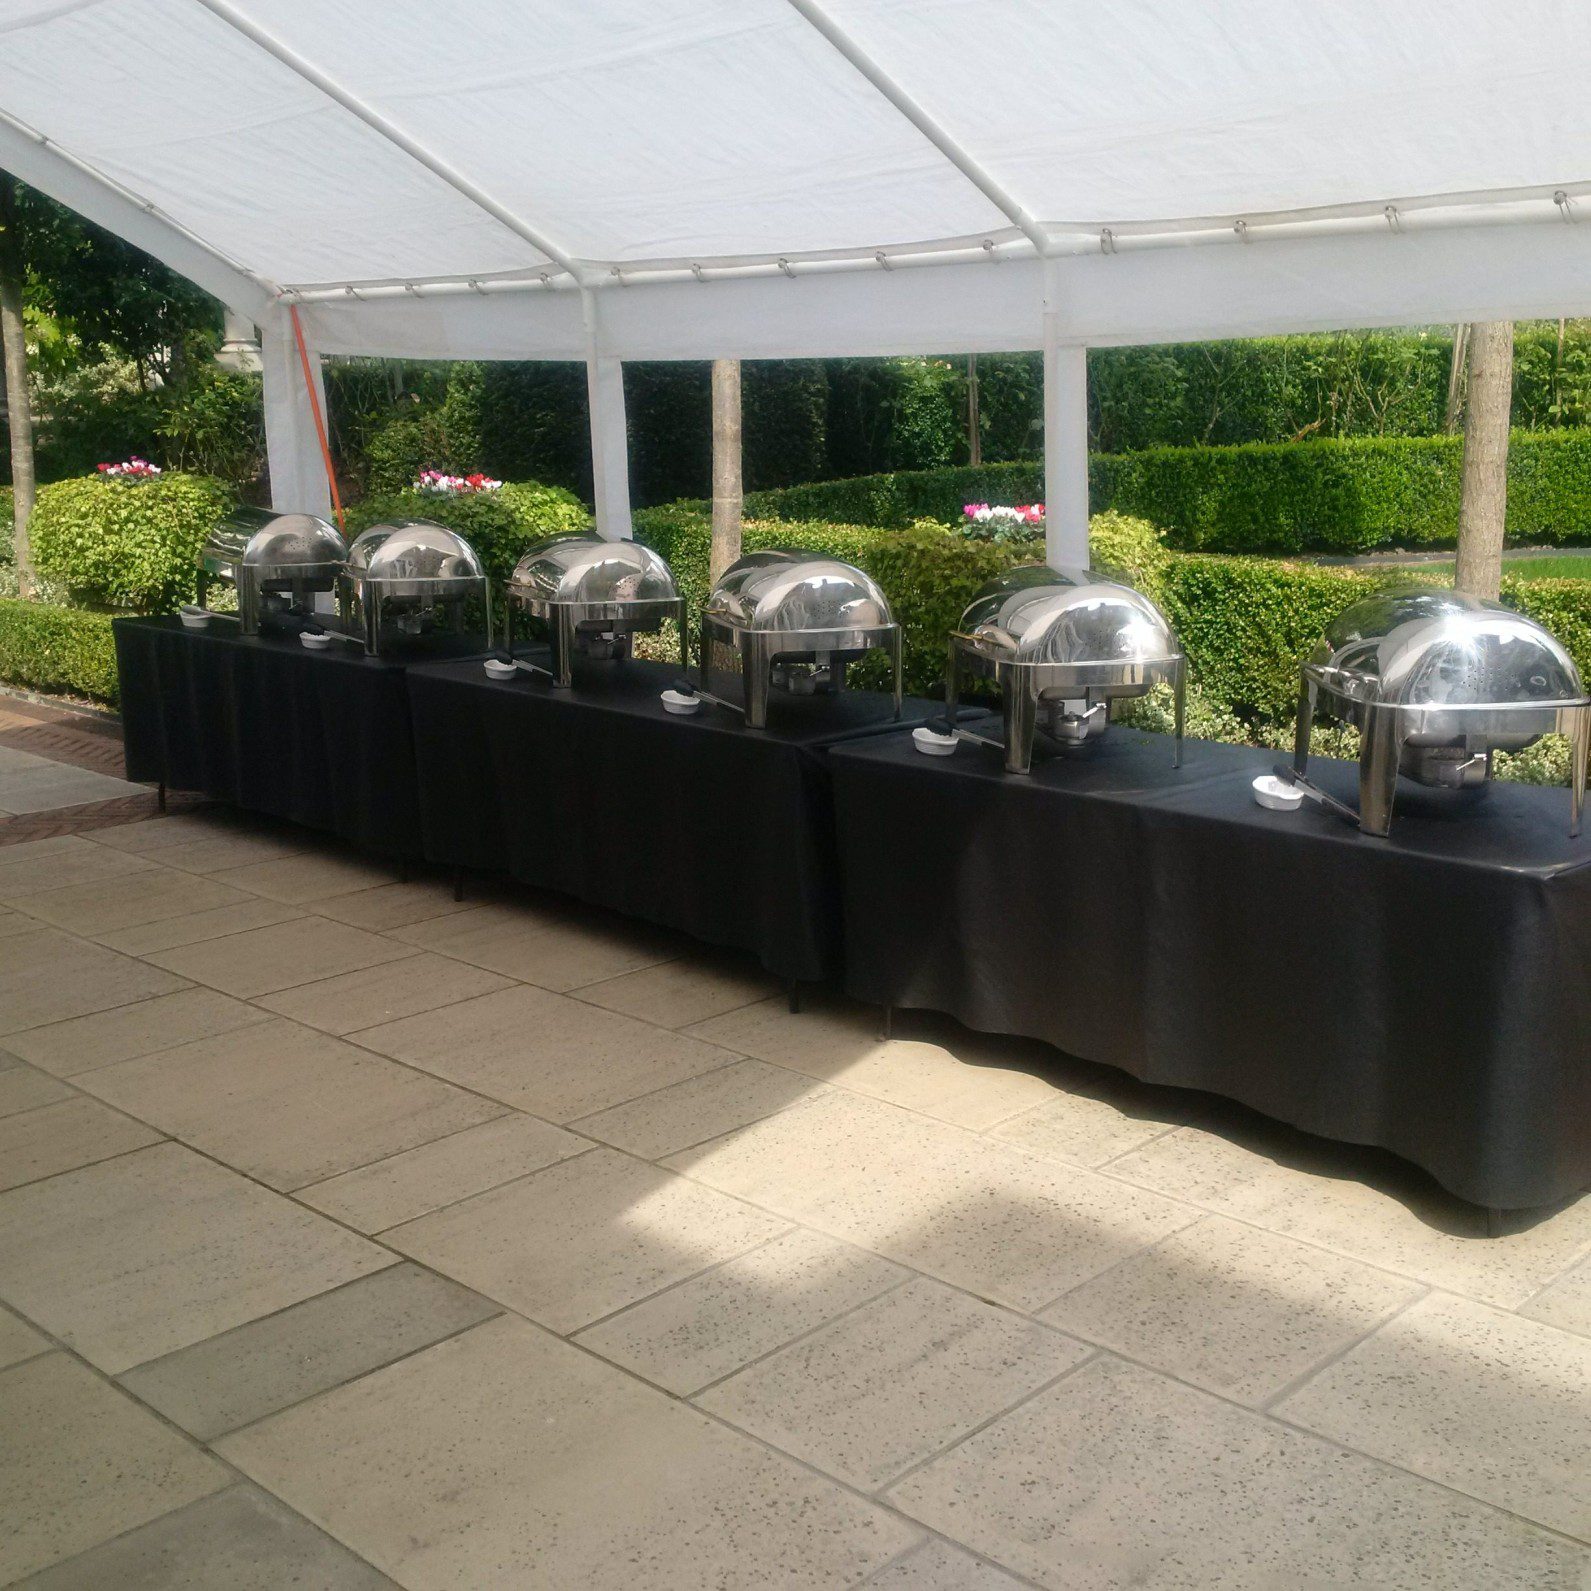 Chafing dishes on black trestle table inside open marquee